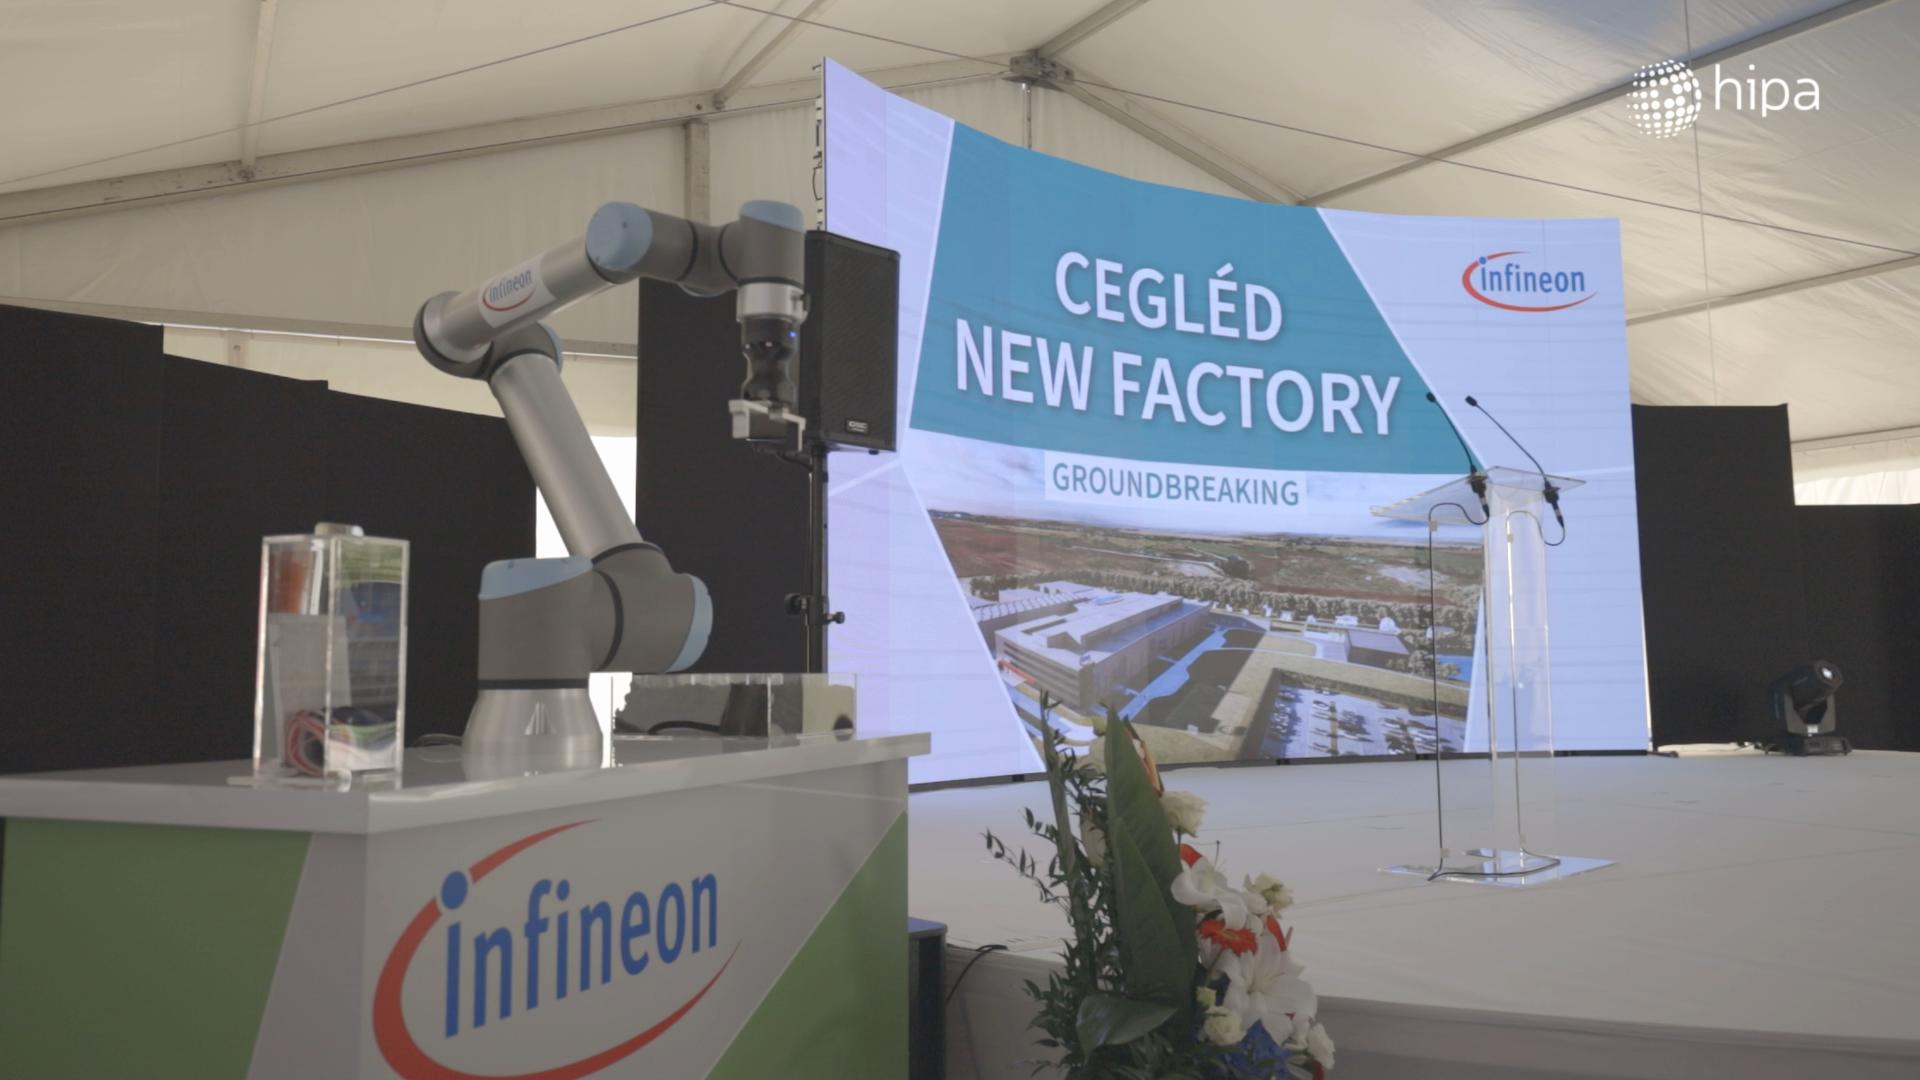 The foundation stone of the new Infineon plant has been laid in Cegléd